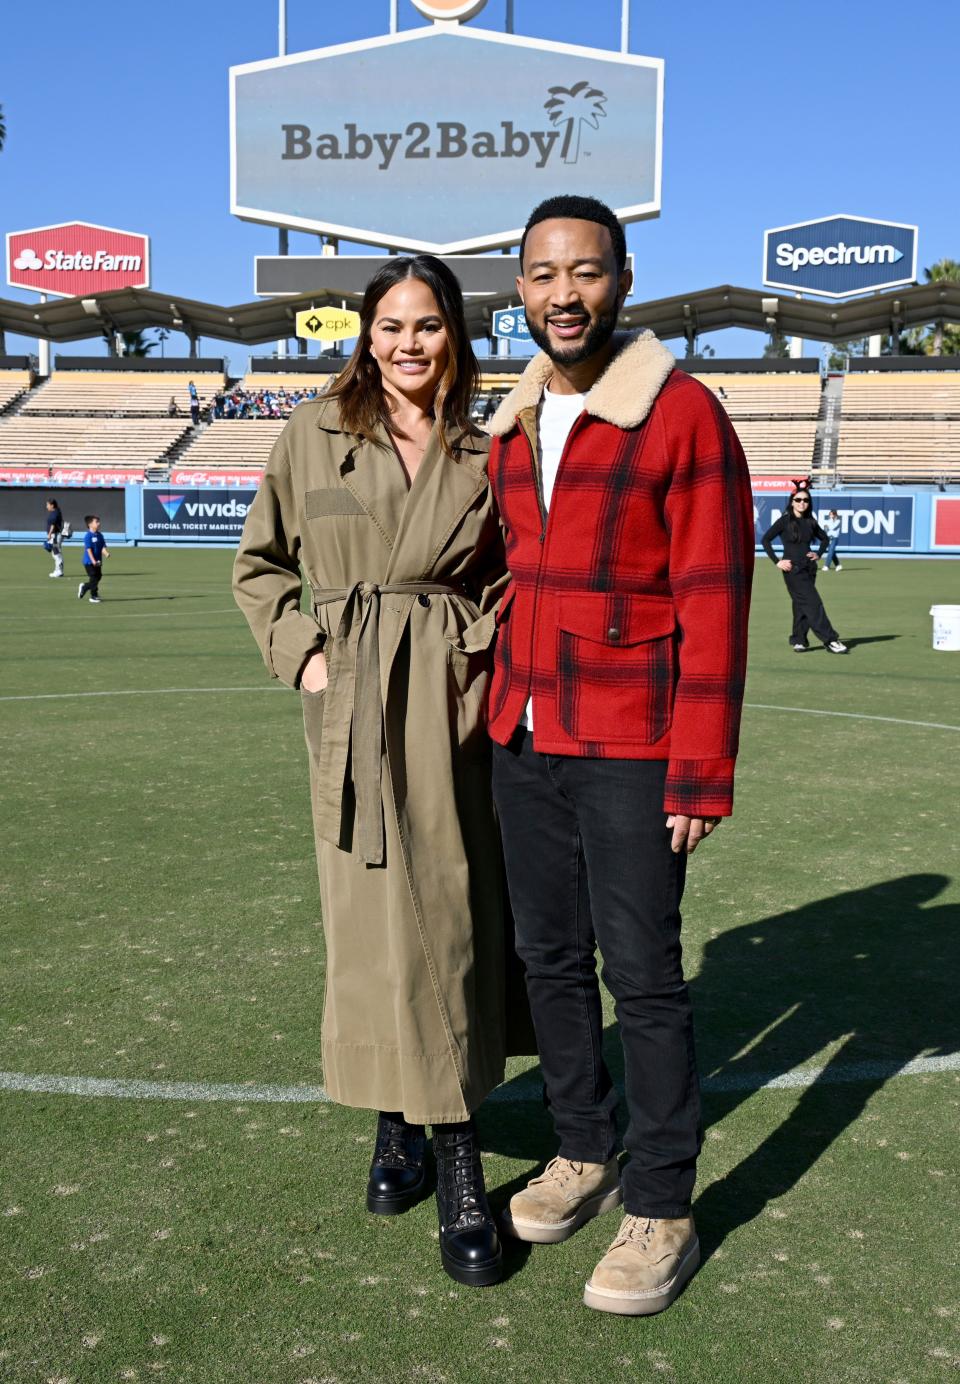 LOS ANGELES, CALIFORNIA - DECEMBER 13: Chrissy Teigen and John Legend attend the 2023 Baby2Baby Holiday Distribution presented by FRAME & Nordstrom at Dodger Stadium on December 13, 2023 in Los Angeles, California. (Photo by Michael Kovac/Getty Images for Baby2Baby)